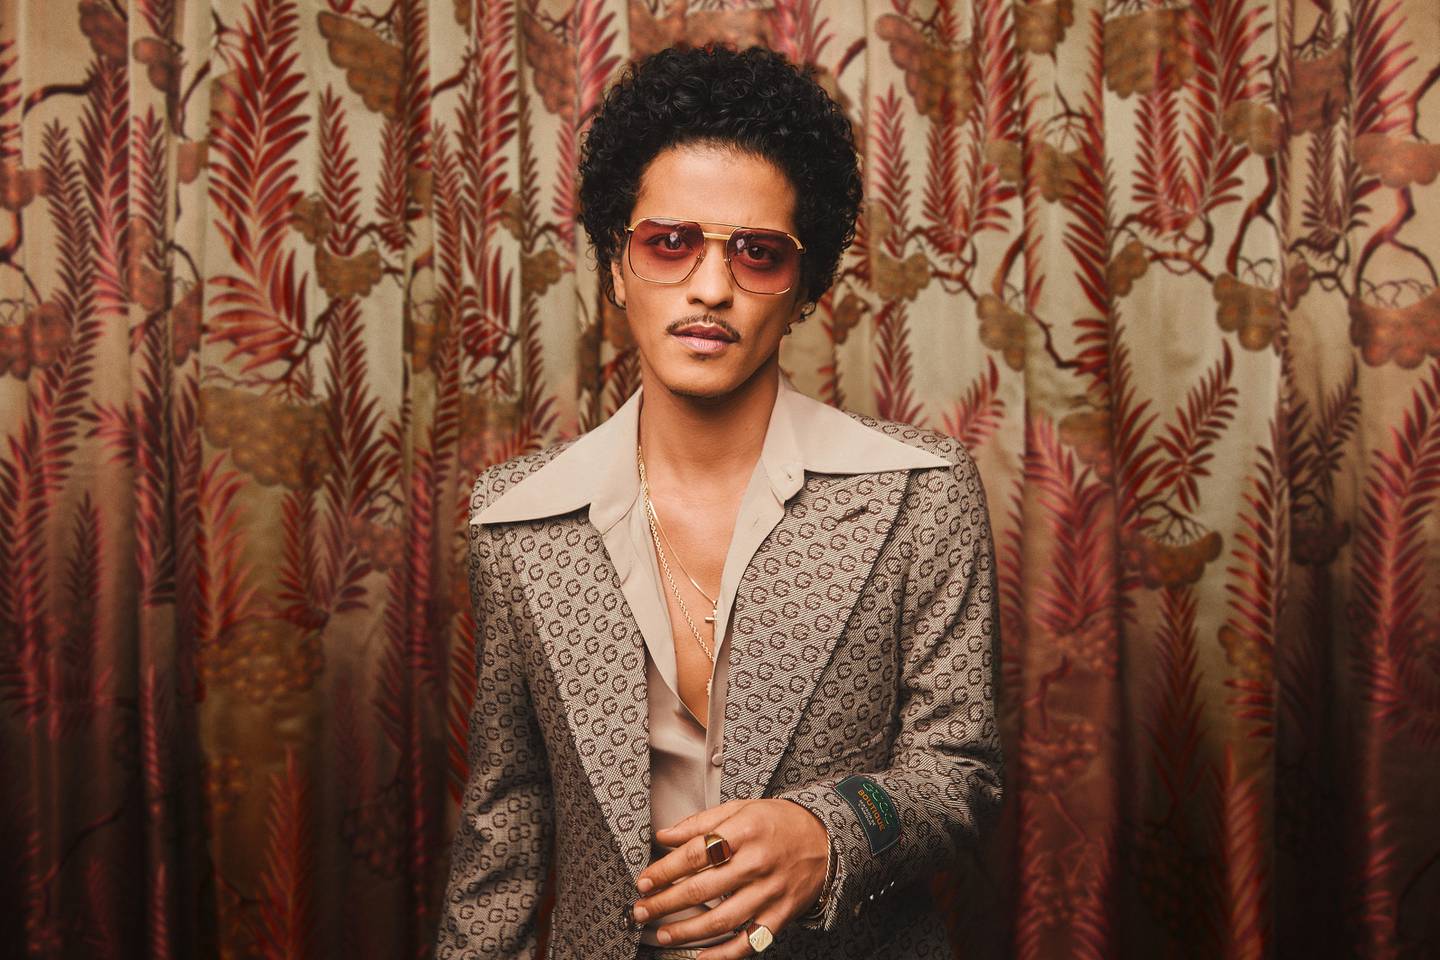 Preakness Stakes and Pimlico Race Course, have announced that fourteen-time GRAMMY Award-winner Bruno Mars will headline Preakness LIVE, the star-studded grand finale of Preakness Weekend on Saturday, May 20